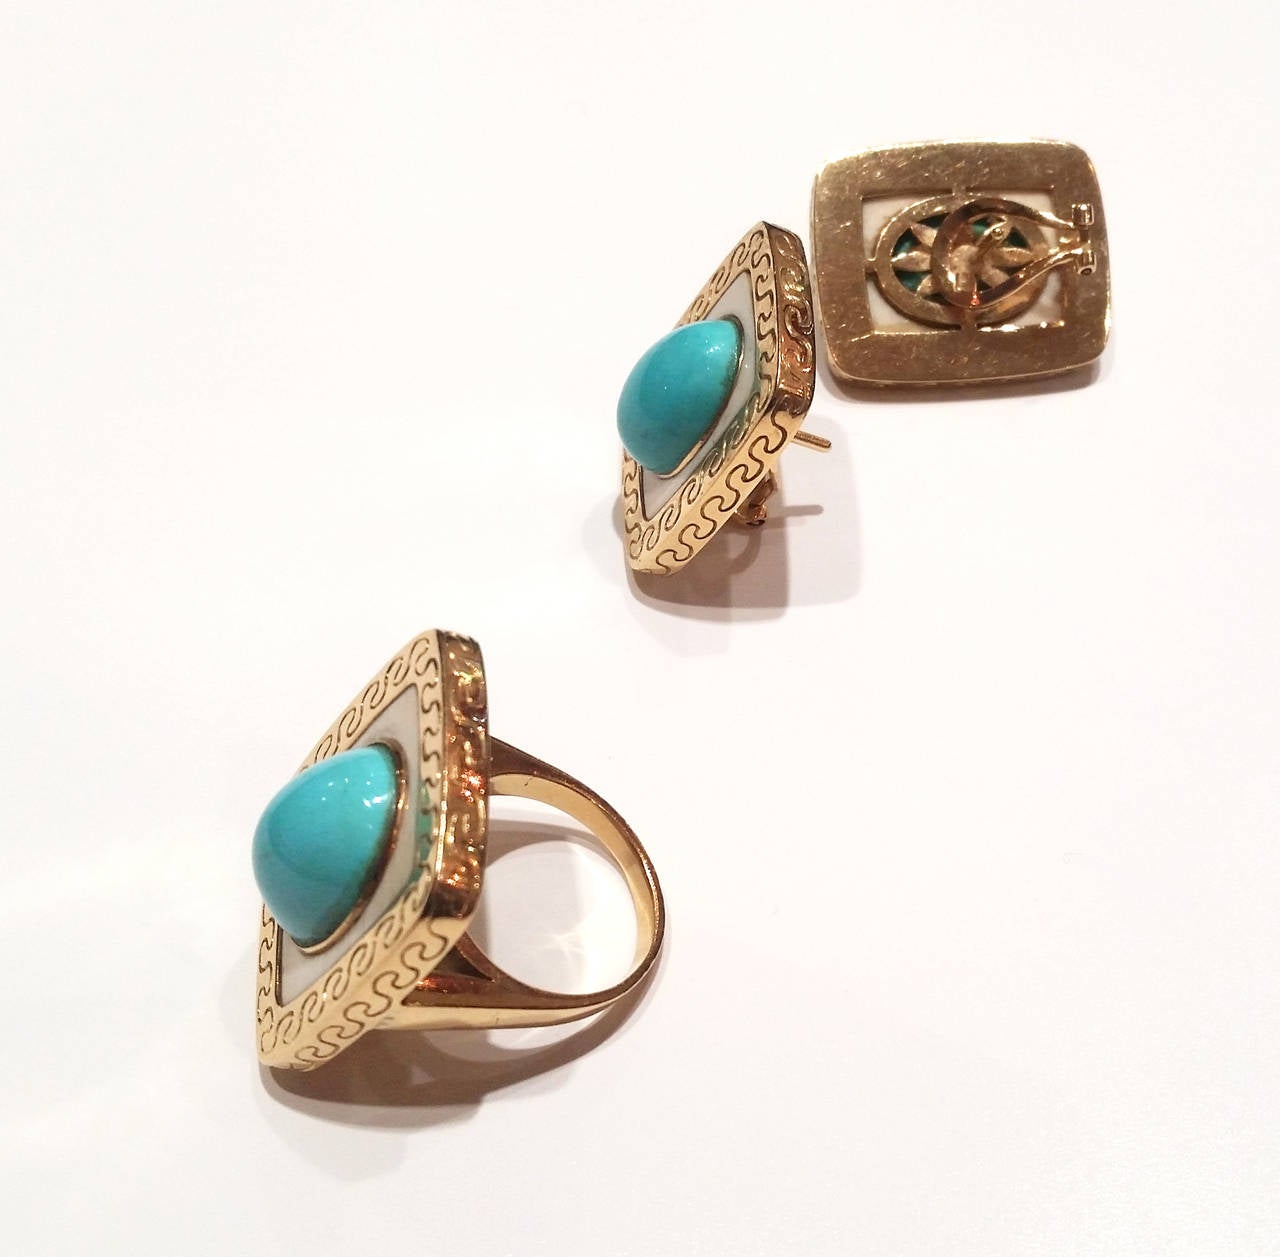 1970s Earclips and Ring in 18kt yellow gold and turquoise cabochons

Earclips: 23.1gr
Ring: 20.1gr  - size EU: 15 - US: 7 1/4